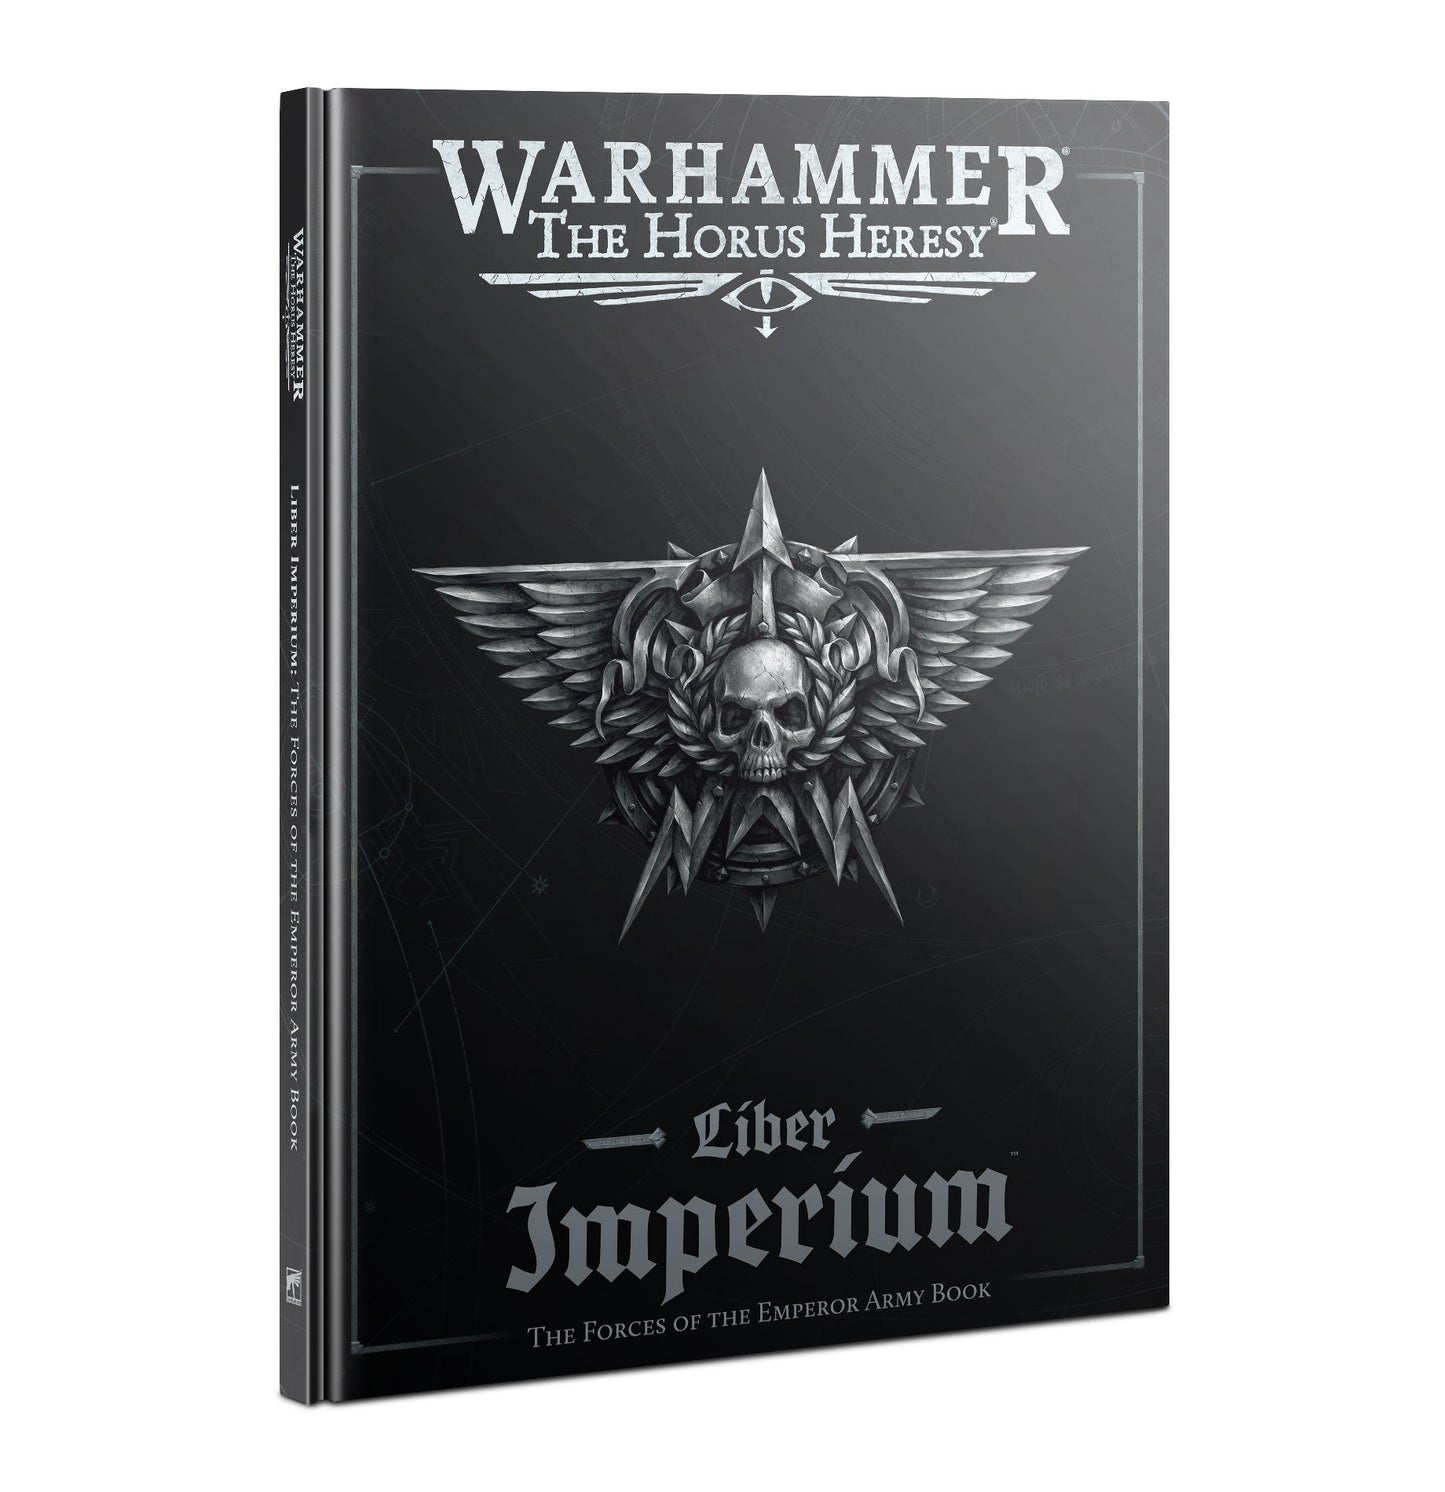 Liber Imperium: Forces of the Emperor Army Book - Gamescape